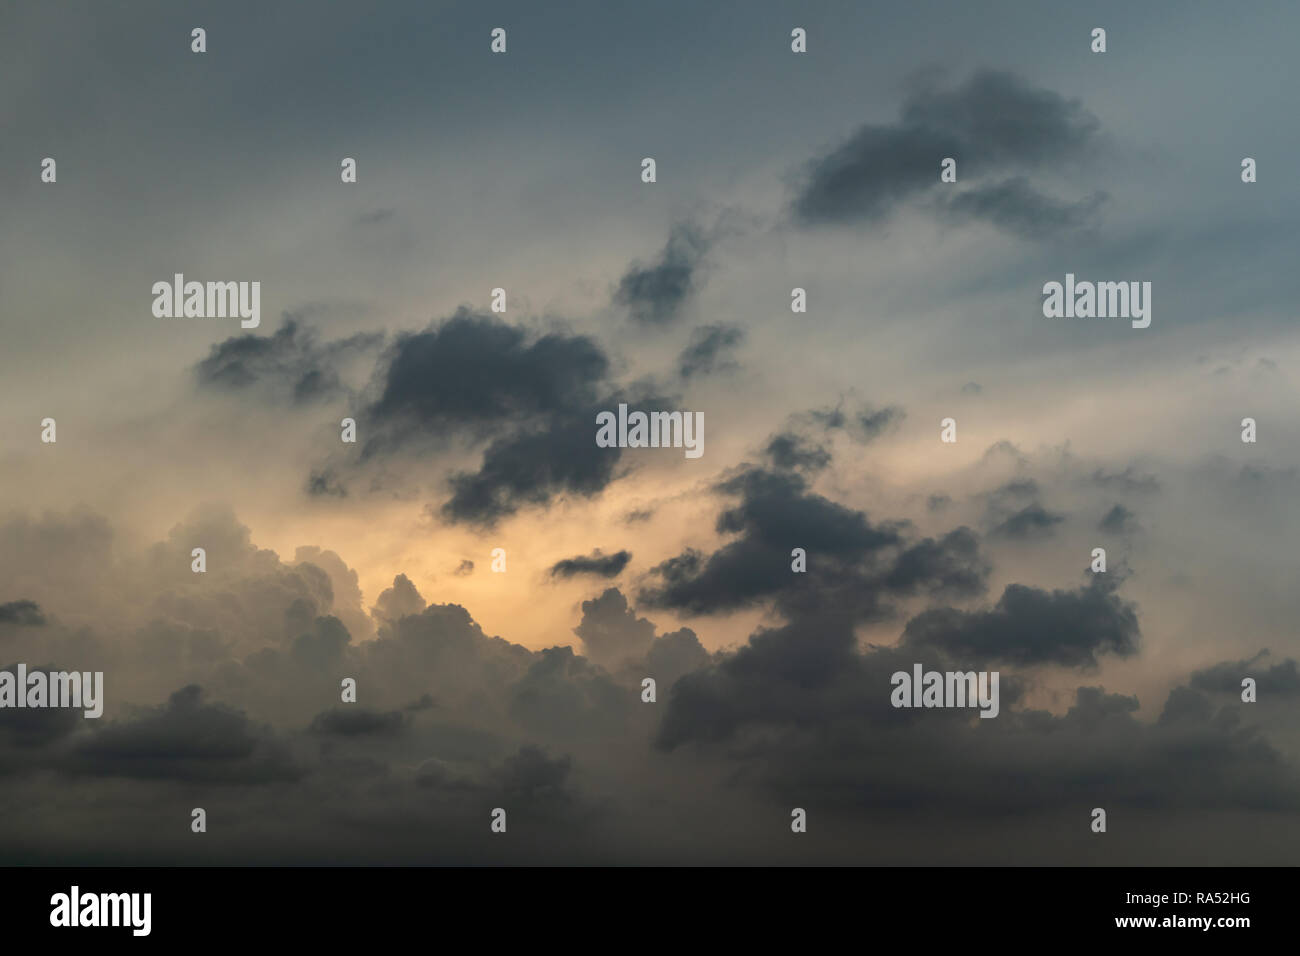 Evening cloud formation background Stock Photo